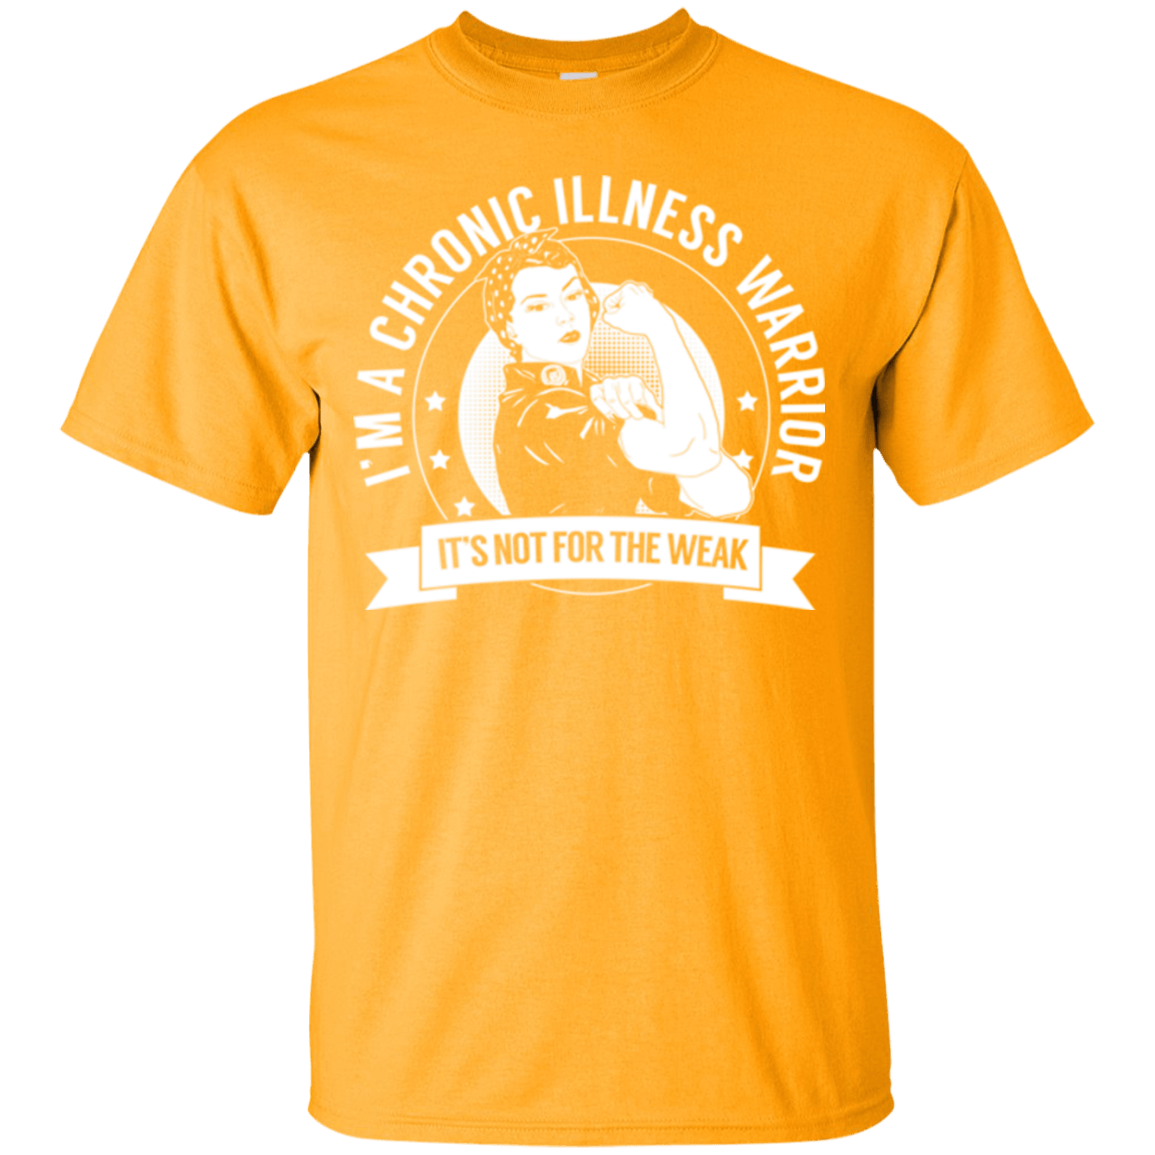 Chronic Illness Warrior Not For The Weak Unisex Shirt - The Unchargeables